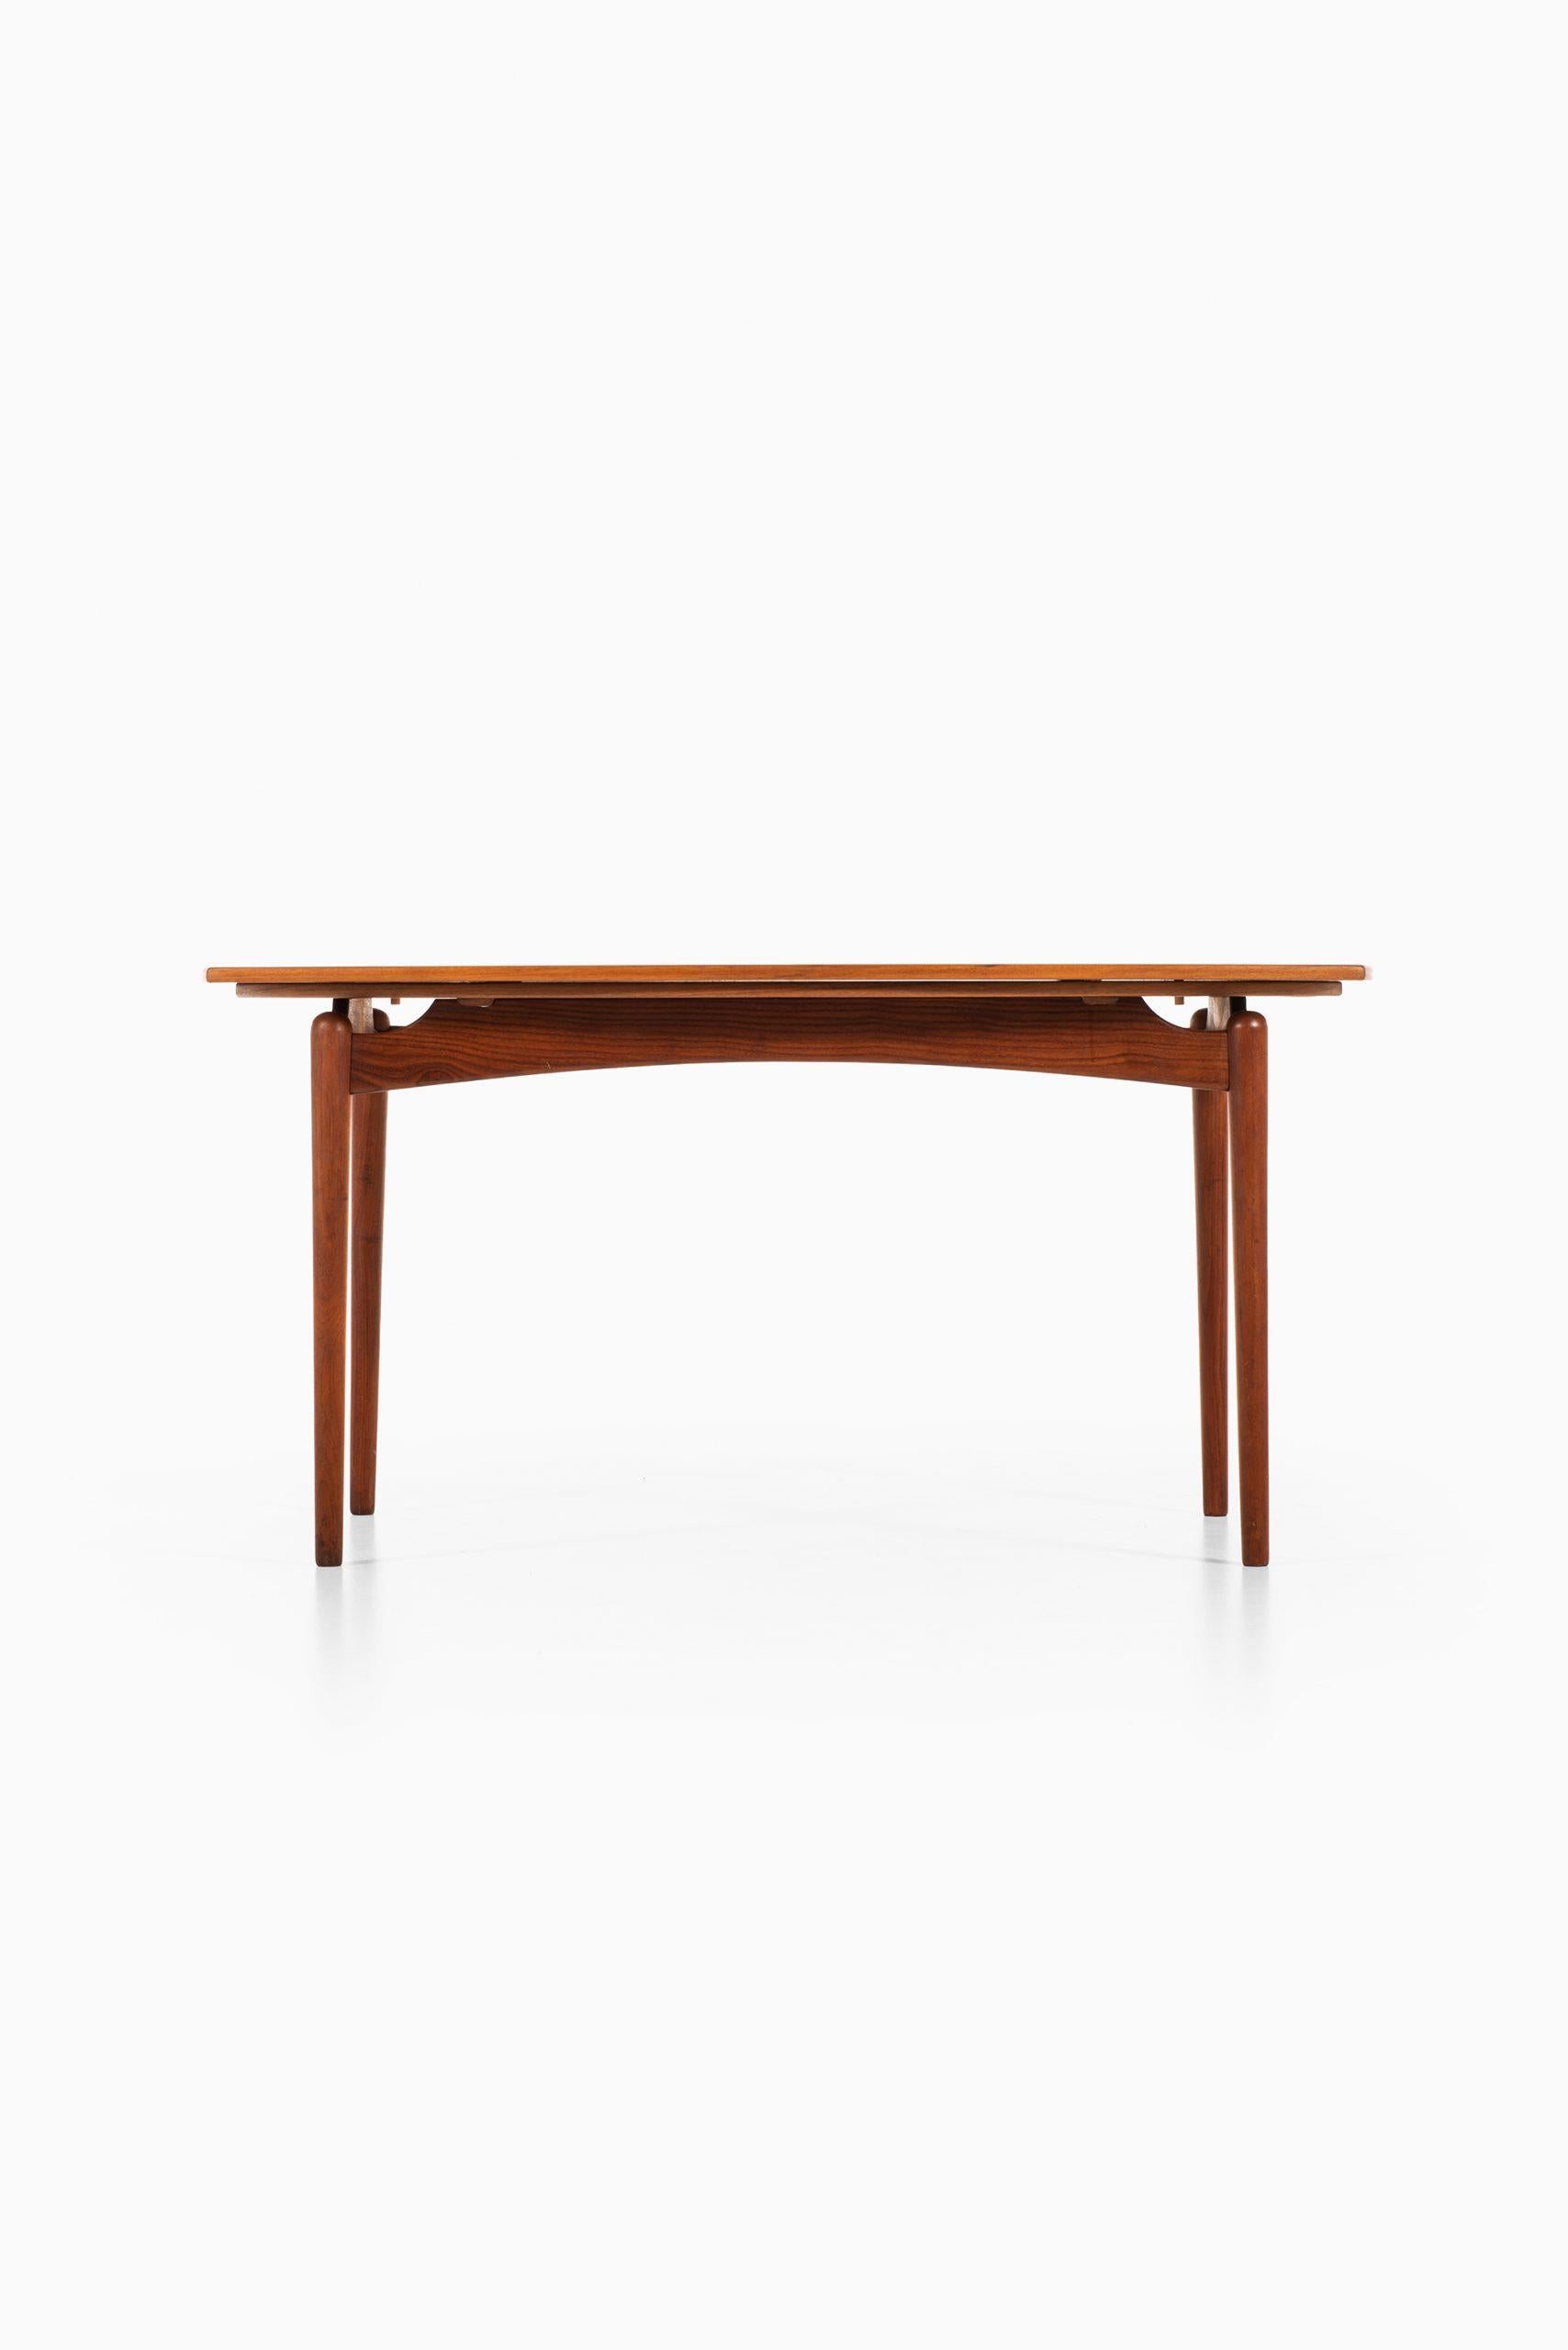 Rare dining table in the style of Finn Juhl. Produced in Denmark.
Dimensions (W x D x H): 149.5 x 89 (151.5) x 74 cm.